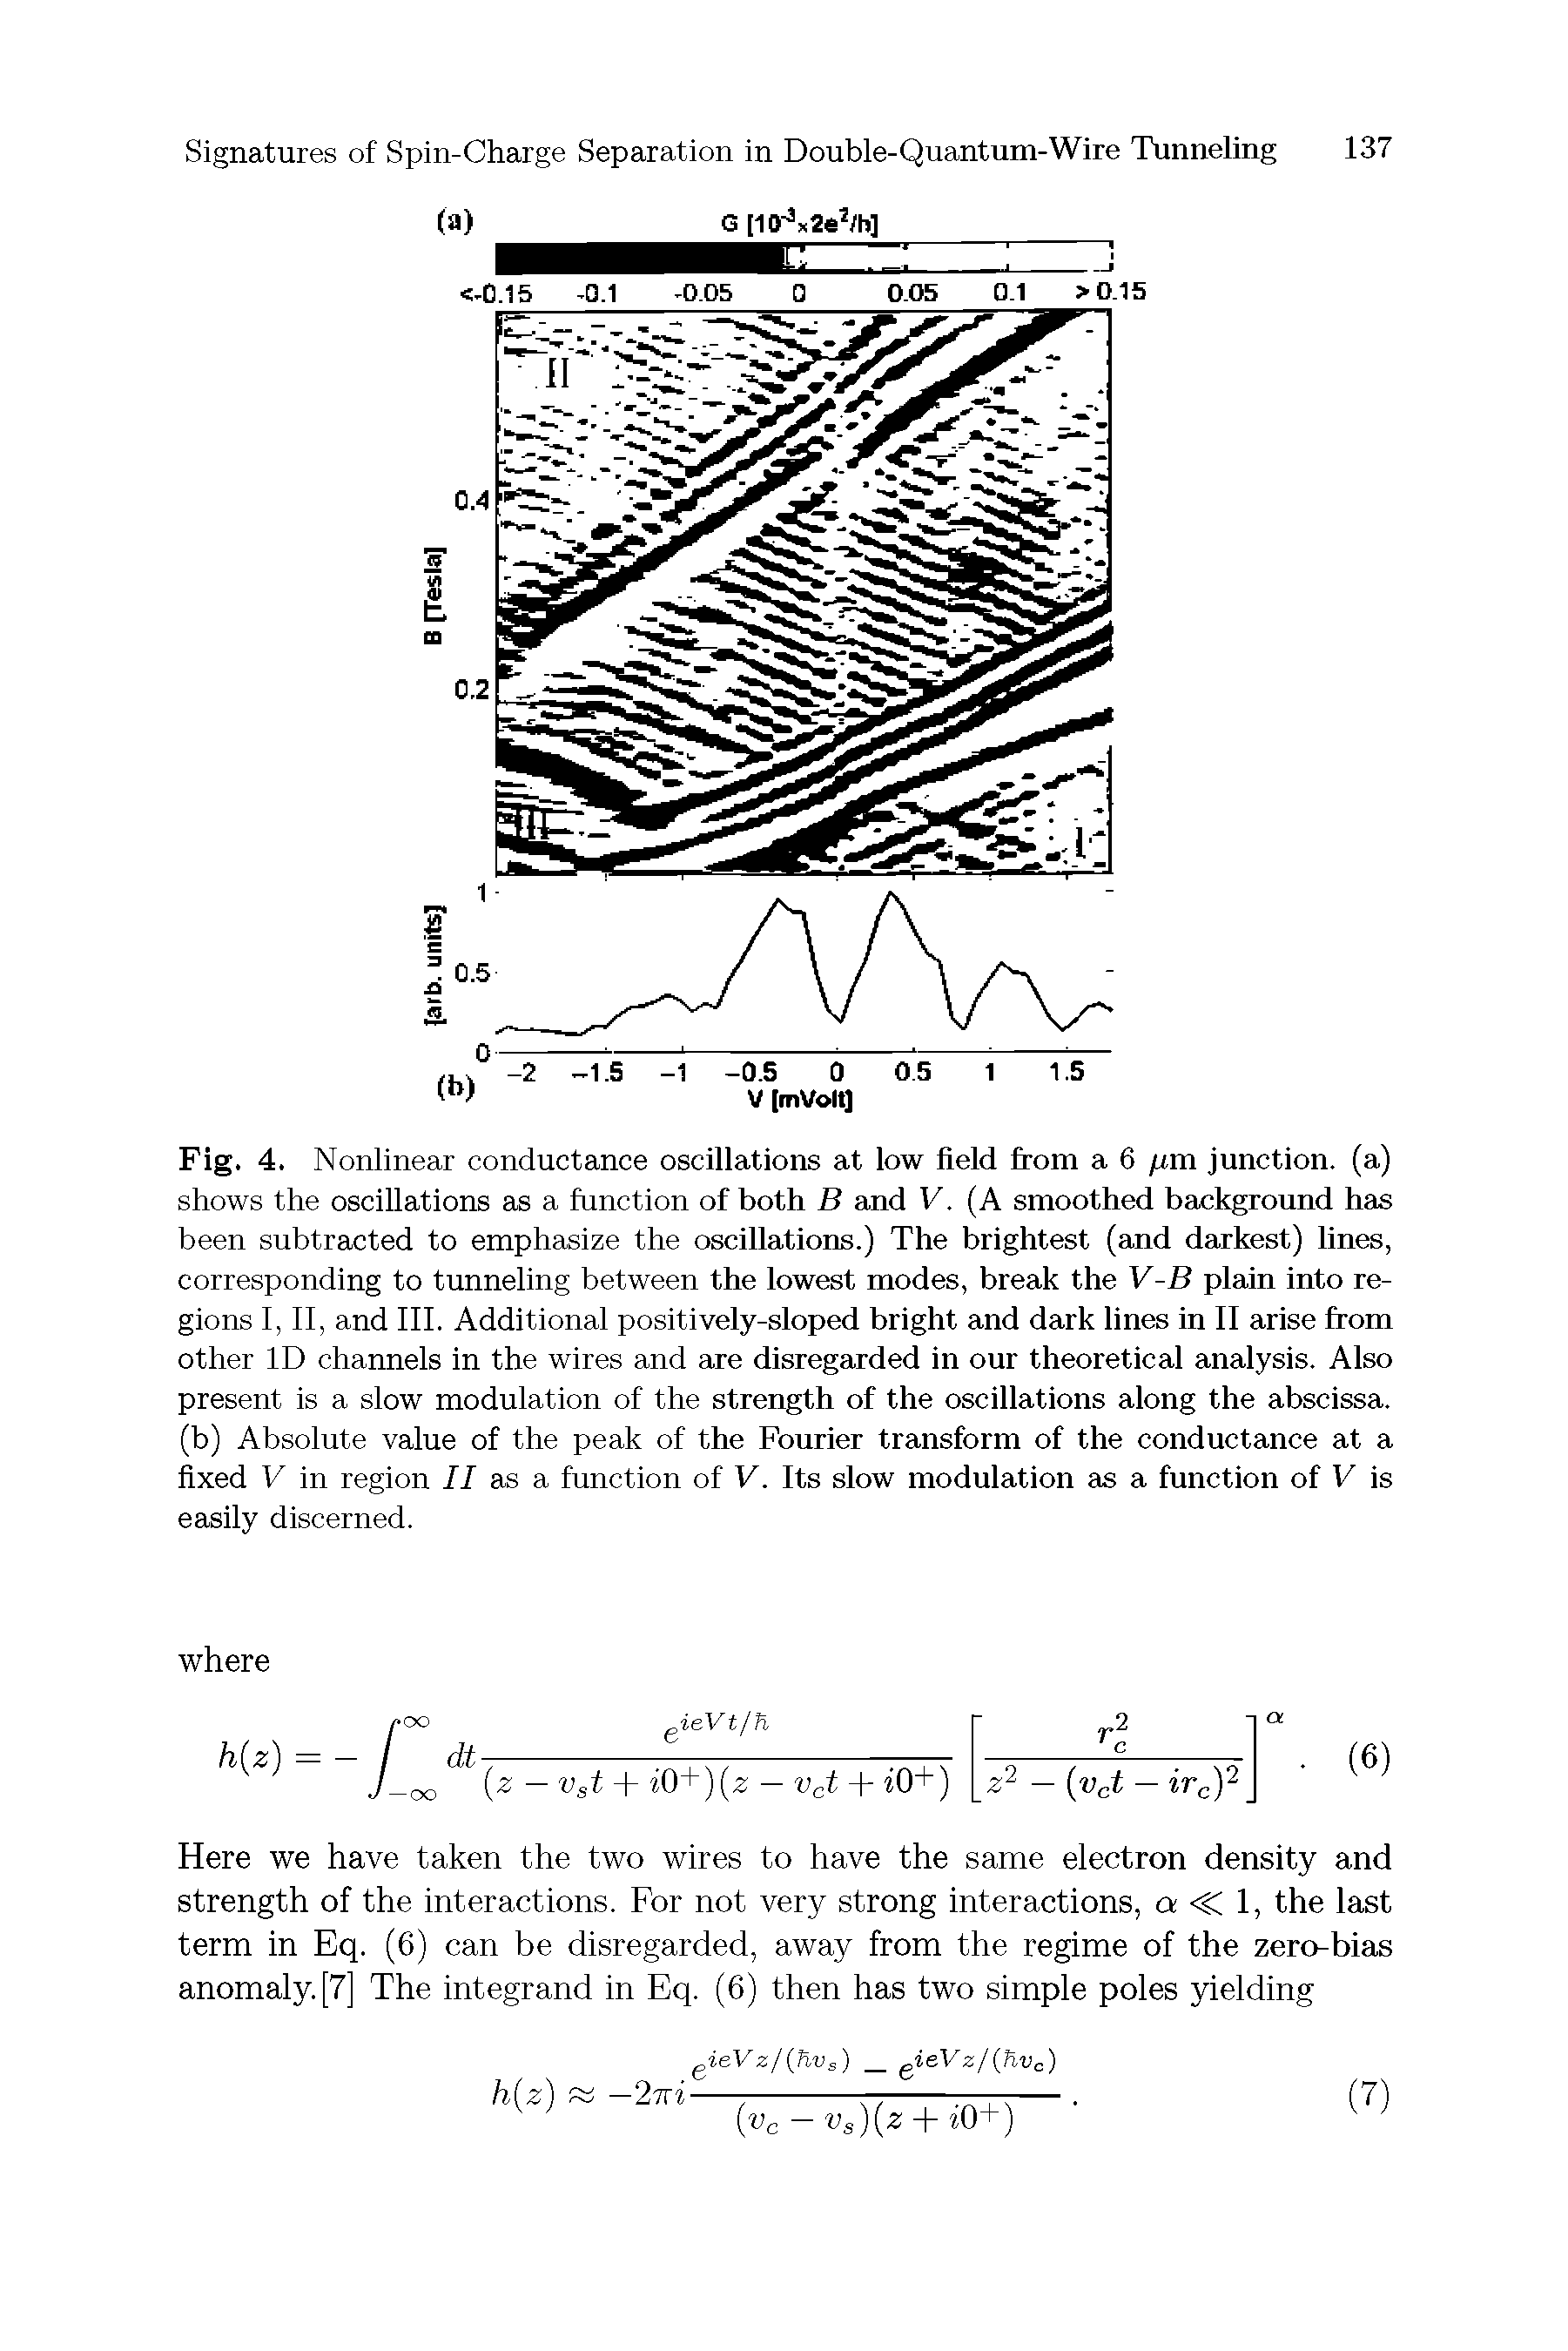 Fig. 4. Nonlinear conductance oscillations at low field from a 6 /mi junction, (a) shows the oscillations as a function of both B and V. (A smoothed background has been subtracted to emphasize the oscillations.) The brightest (and darkest) lines, corresponding to tunneling between the lowest modes, break the V-B plain into regions I, II, and III. Additional positively-sloped bright and dark lines in II arise from other ID channels in the wires and are disregarded in our theoretical analysis. Also present is a slow modulation of the strength of the oscillations along the abscissa, (b) Absolute value of the peak of the Fourier transform of the conductance at a fixed V in region II as a function of V. Its slow modulation as a function of V is easily discerned.